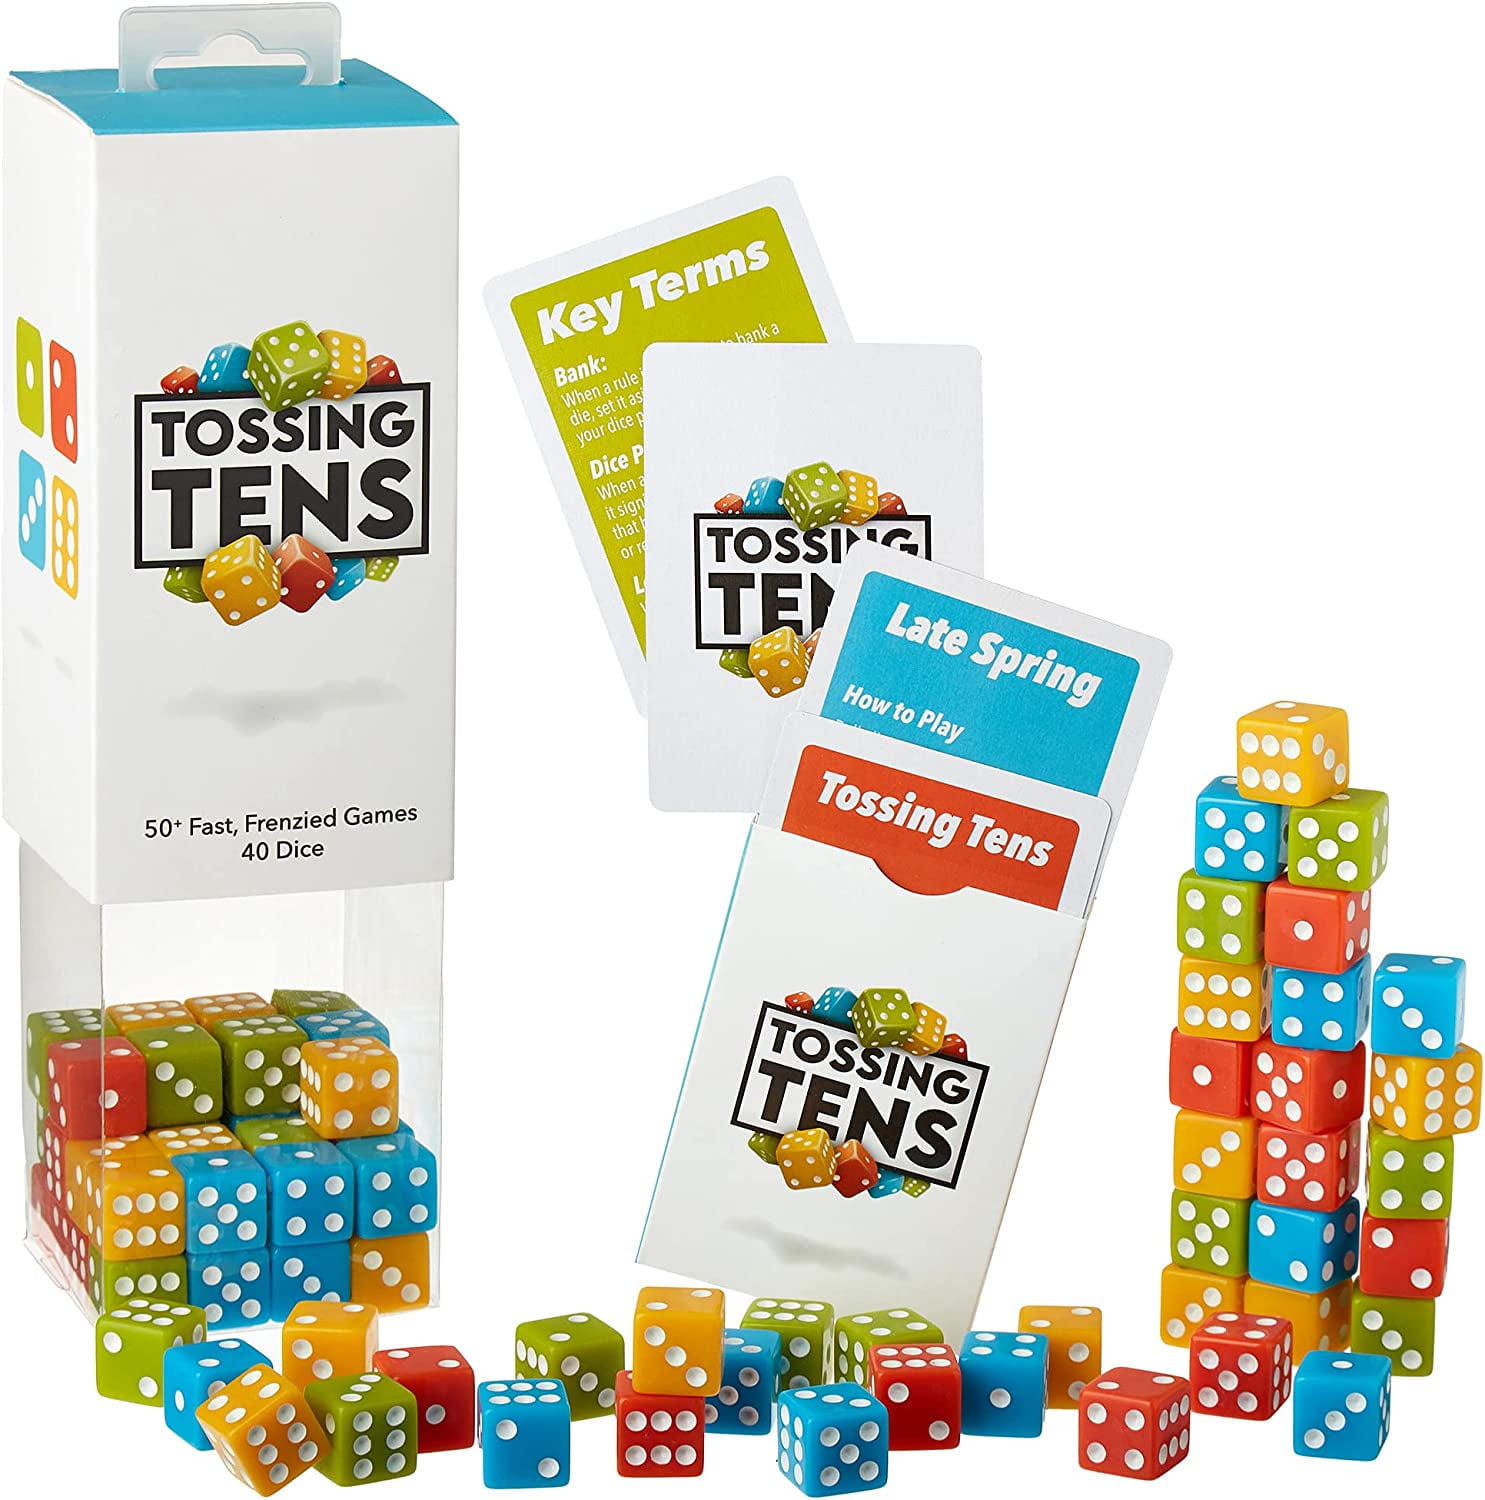 Tossing Tens: 50+ Fast, Frenzied Dice Games – Includes 4 Sets of